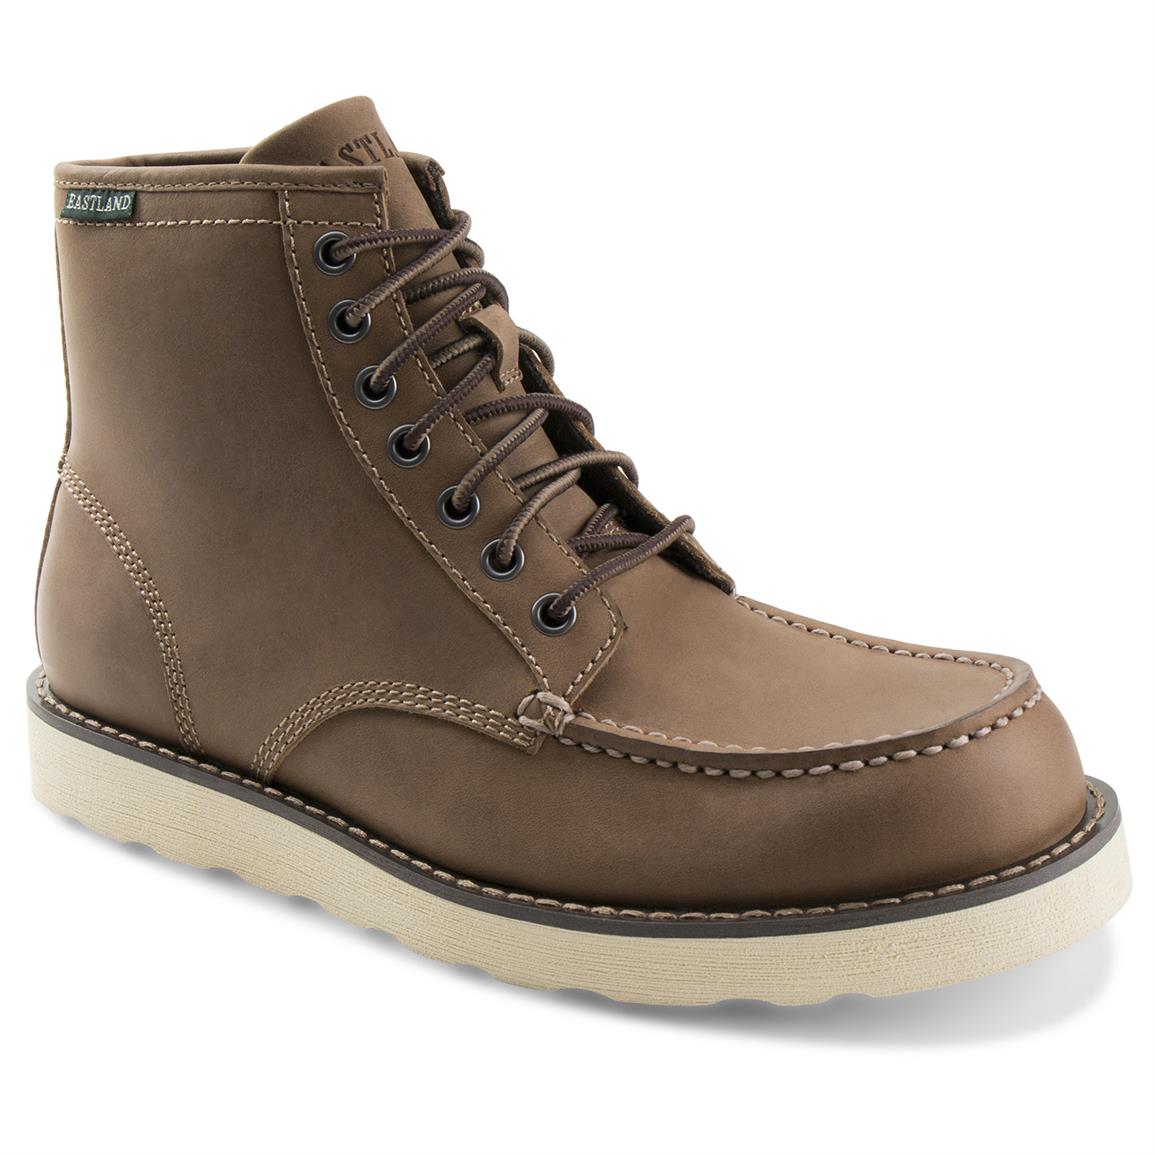 Eastland Lumber Up Boots - 662702, Casual Shoes at Sportsman's Guide